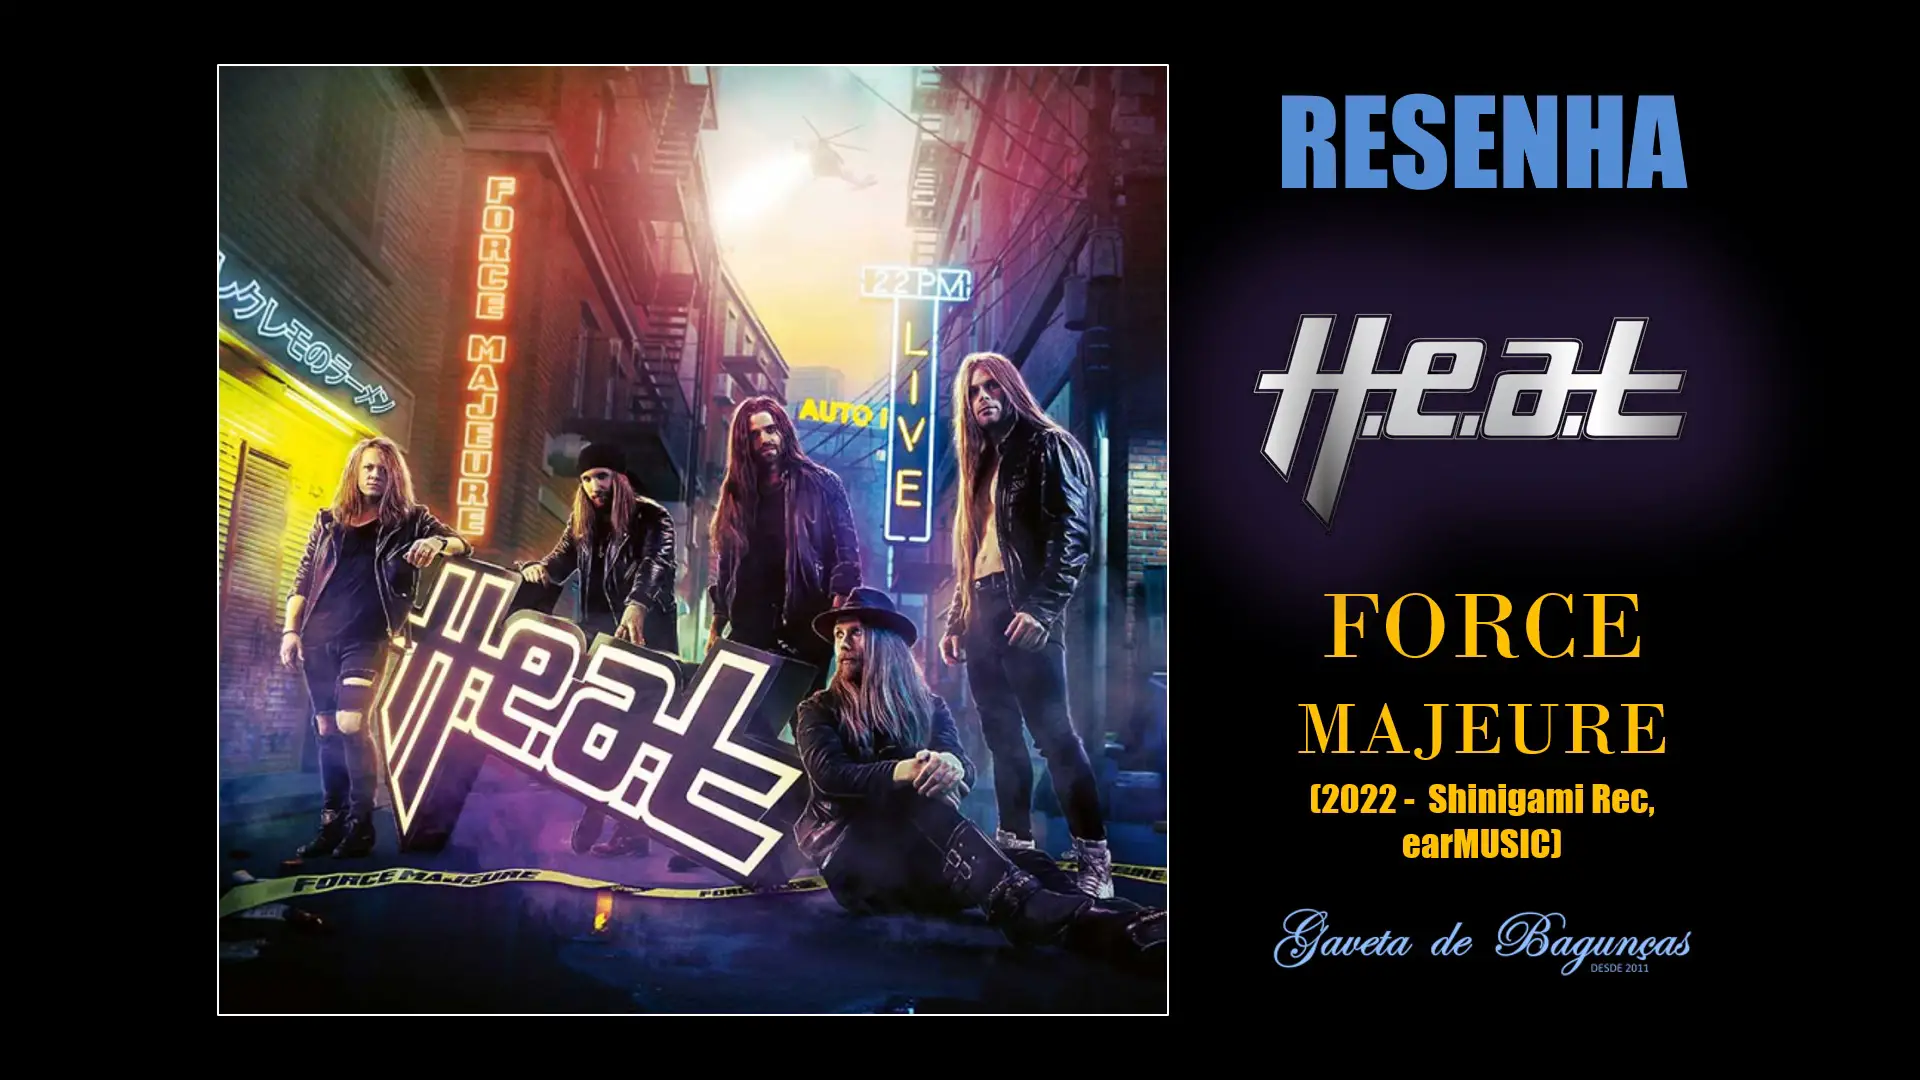 heat-force-majeure-hard-classic-melodic-heavy-rock-aor